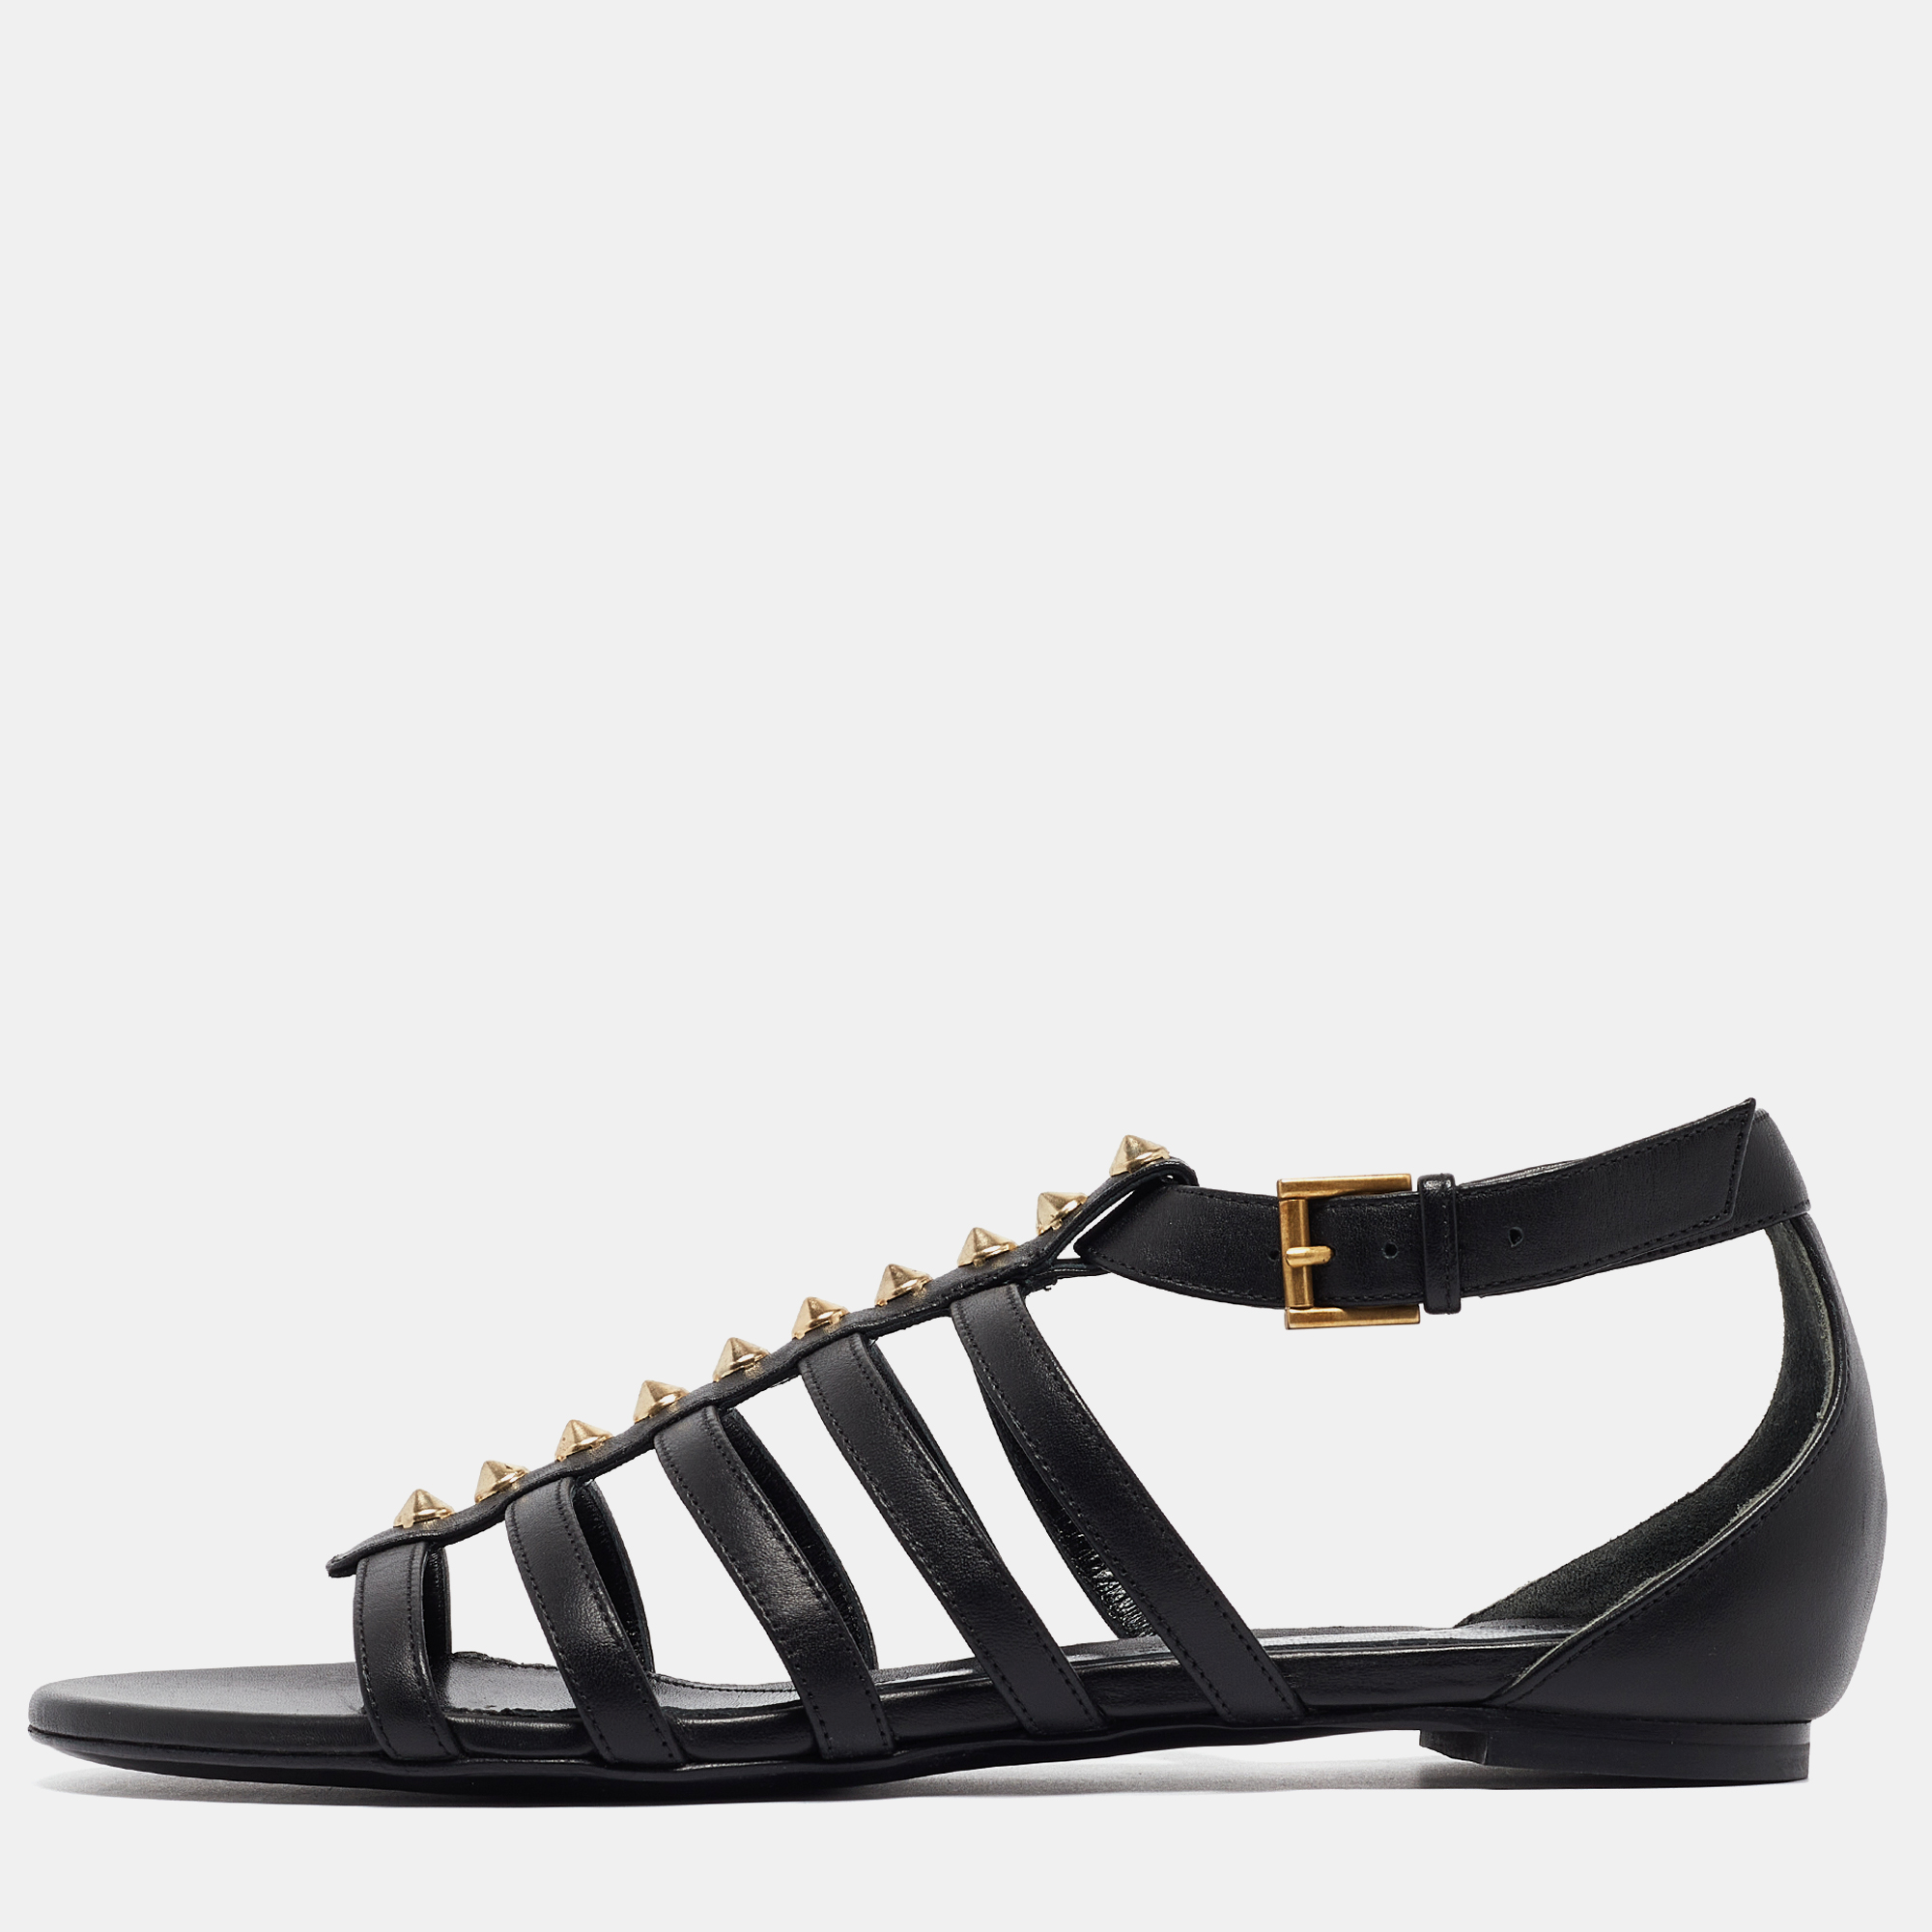 Alexander mcqueen black leather studded flat sandals size 38